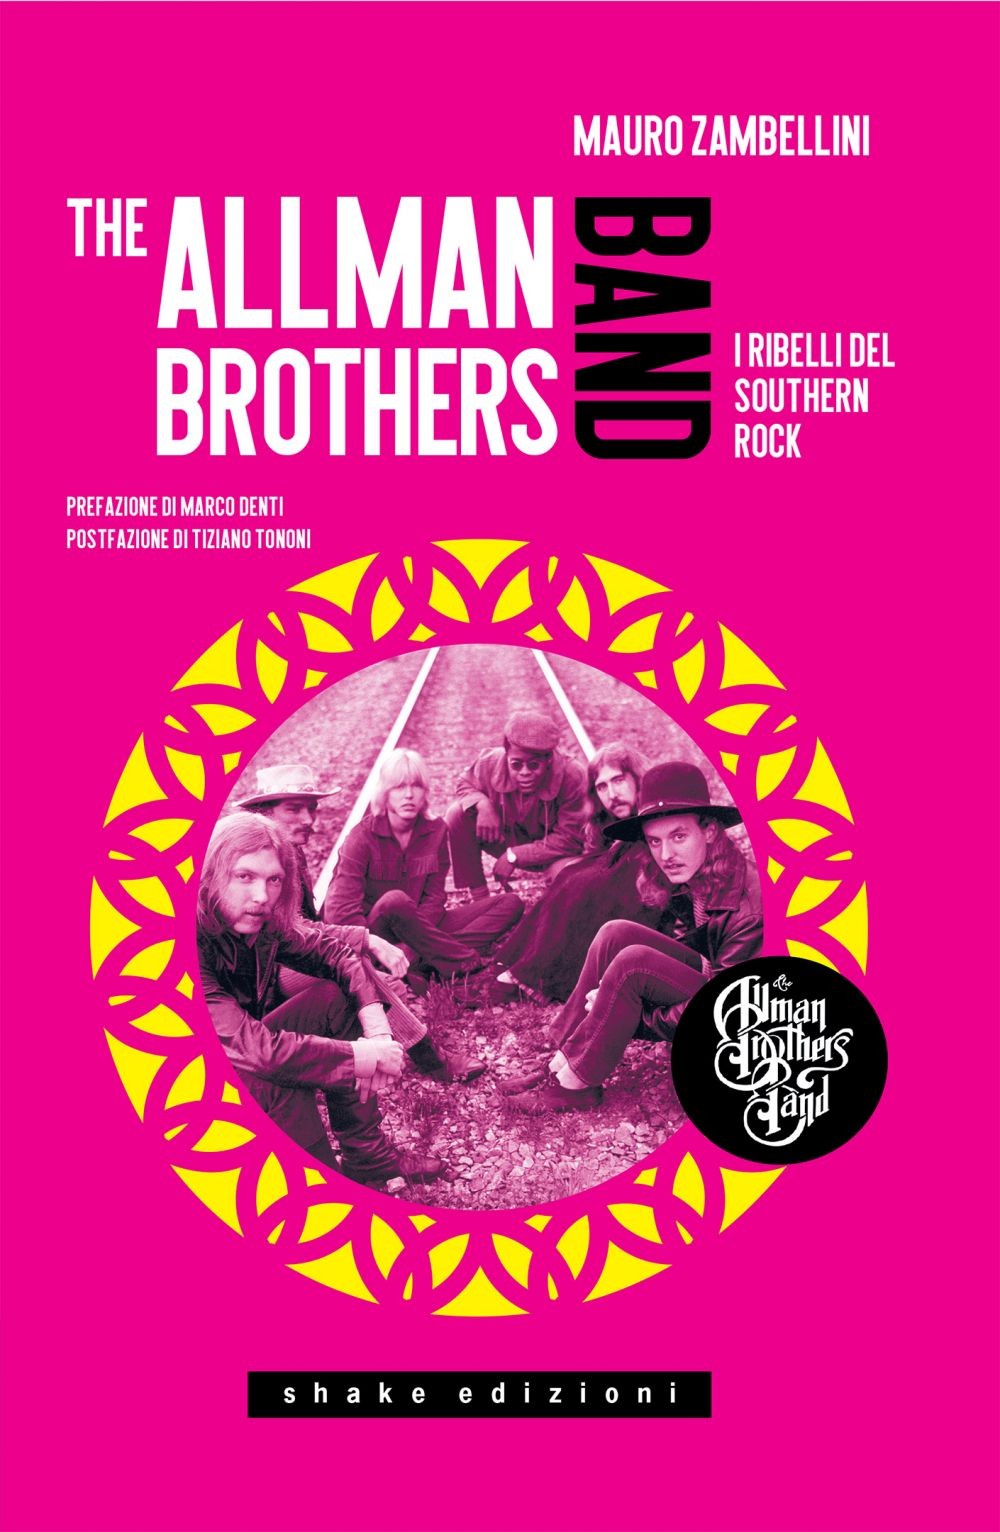 The Allman Brothers Band - Librerie.coop